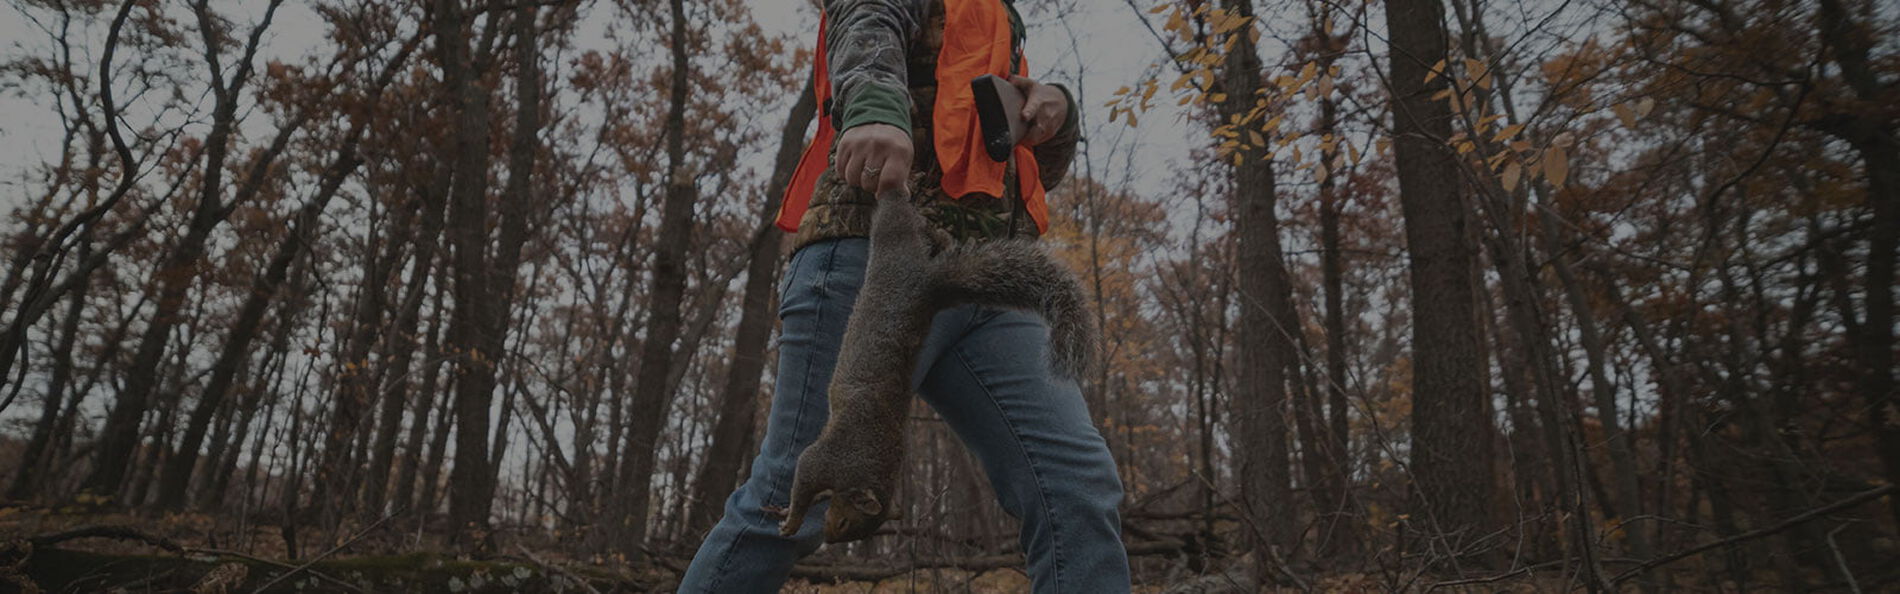 hunter carrying dead squirrel